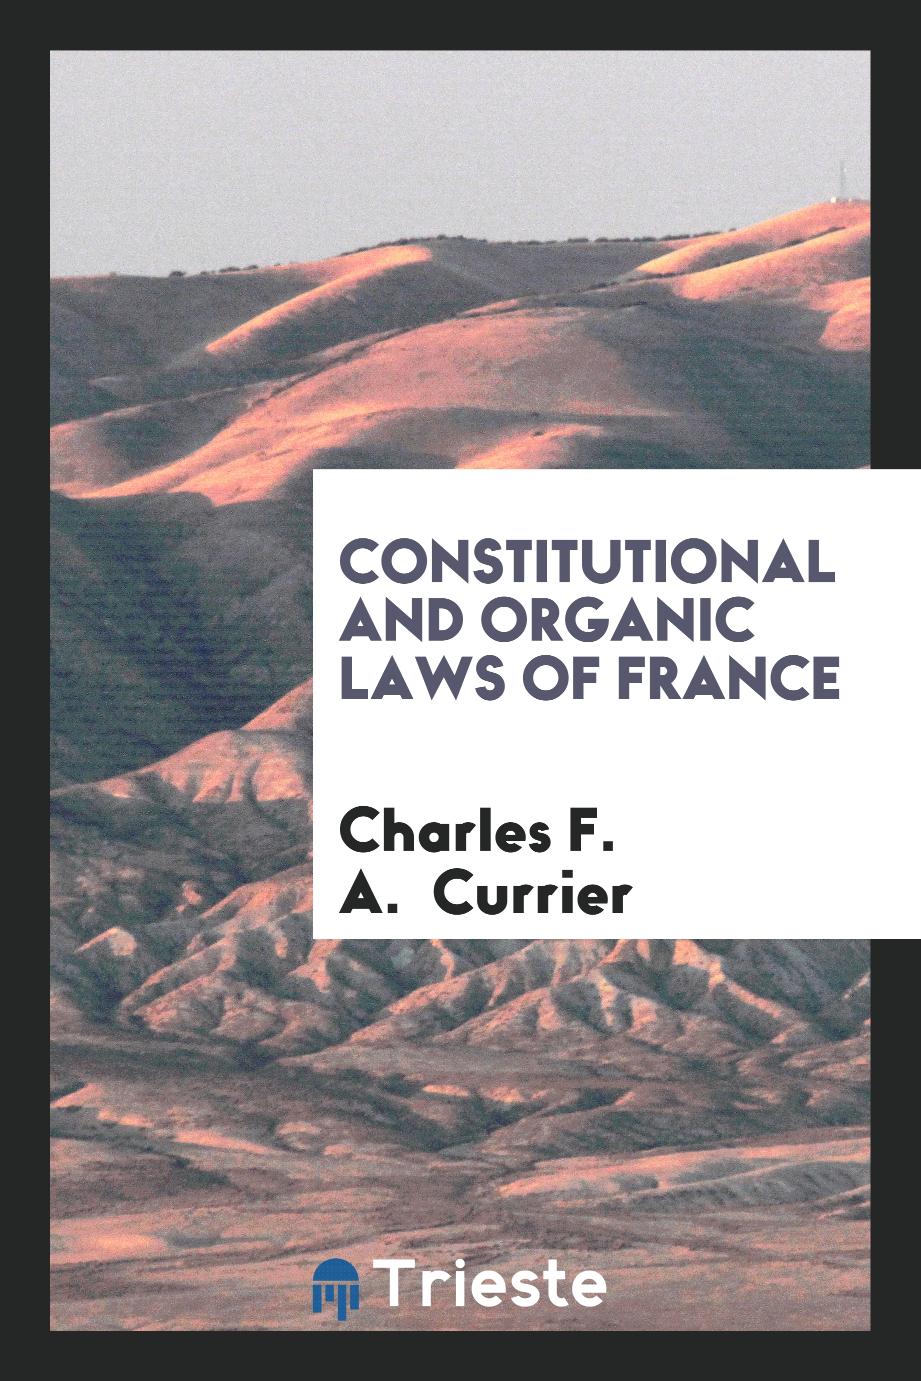 Constitutional and Organic Laws of France